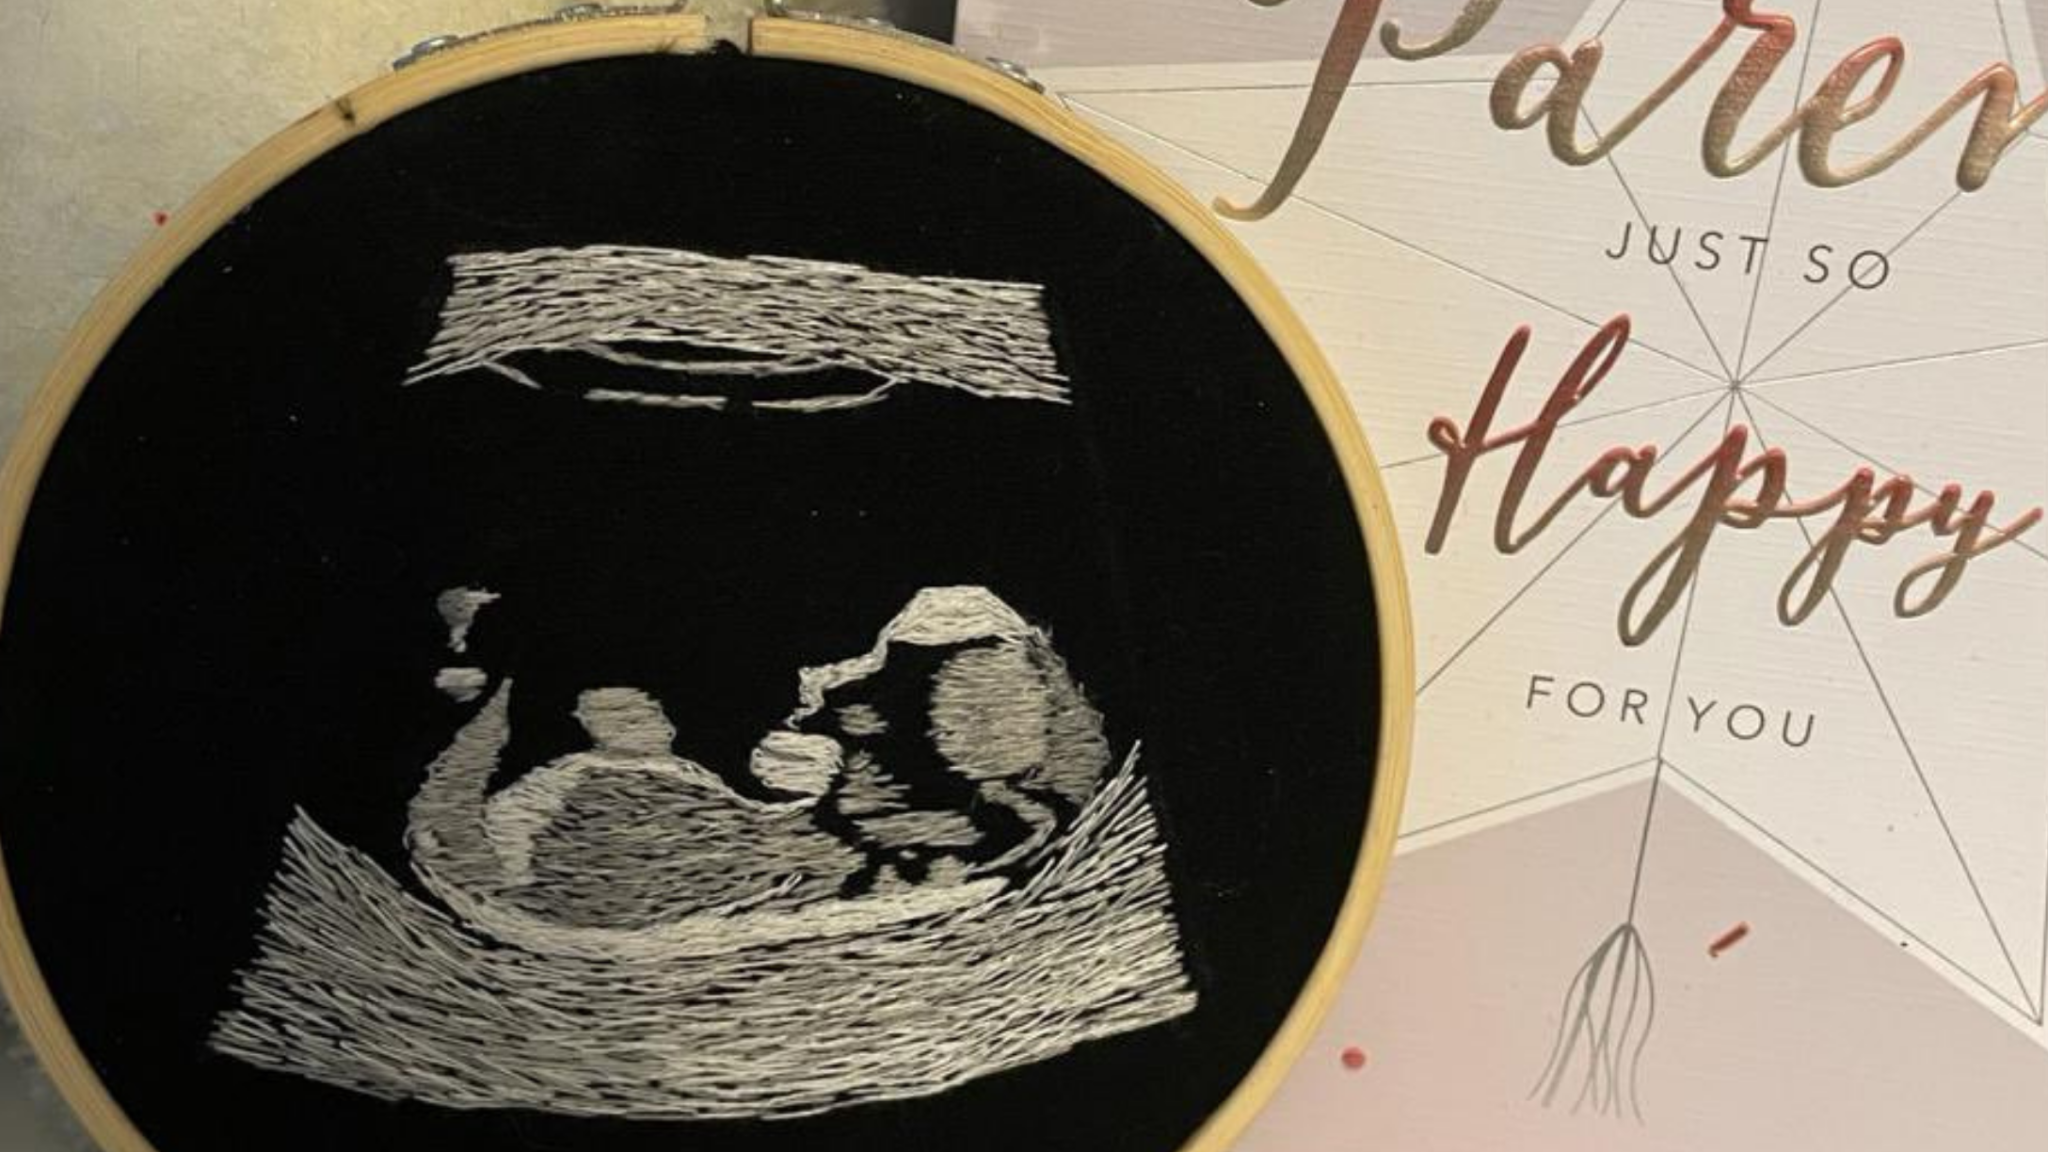 Blind Dad-To-Be Is Surprised With Embroidered Ultrasound So He Can 'See' Unborn Baby